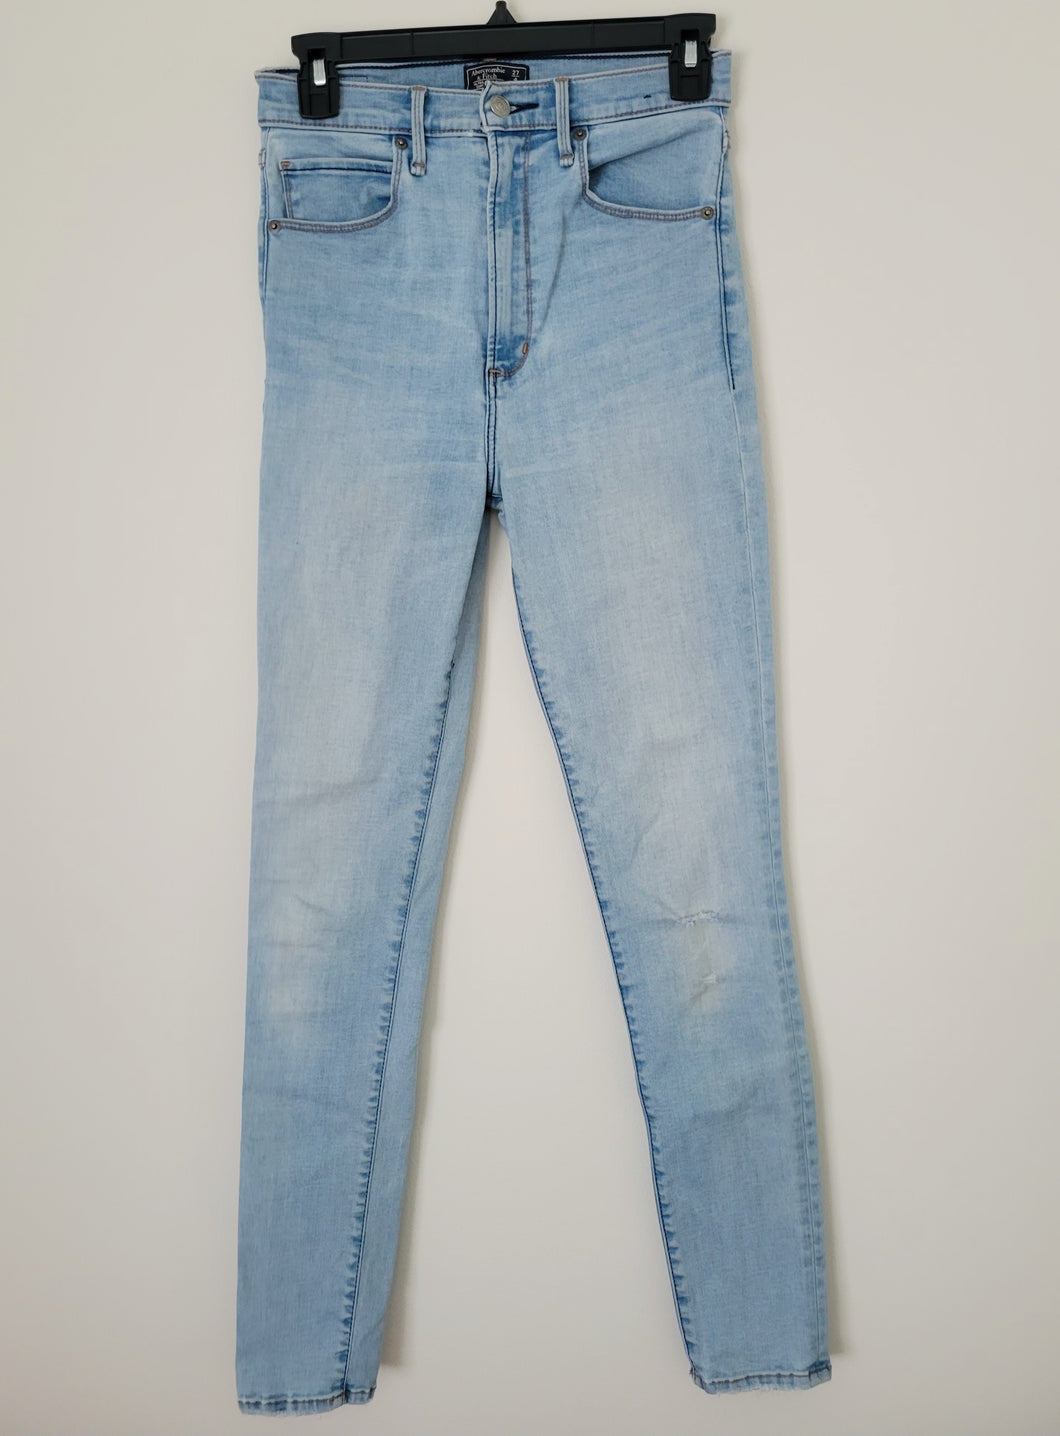 Abercrombie & Fitch Ultra High Rise Super Skinny jeans Adult Small